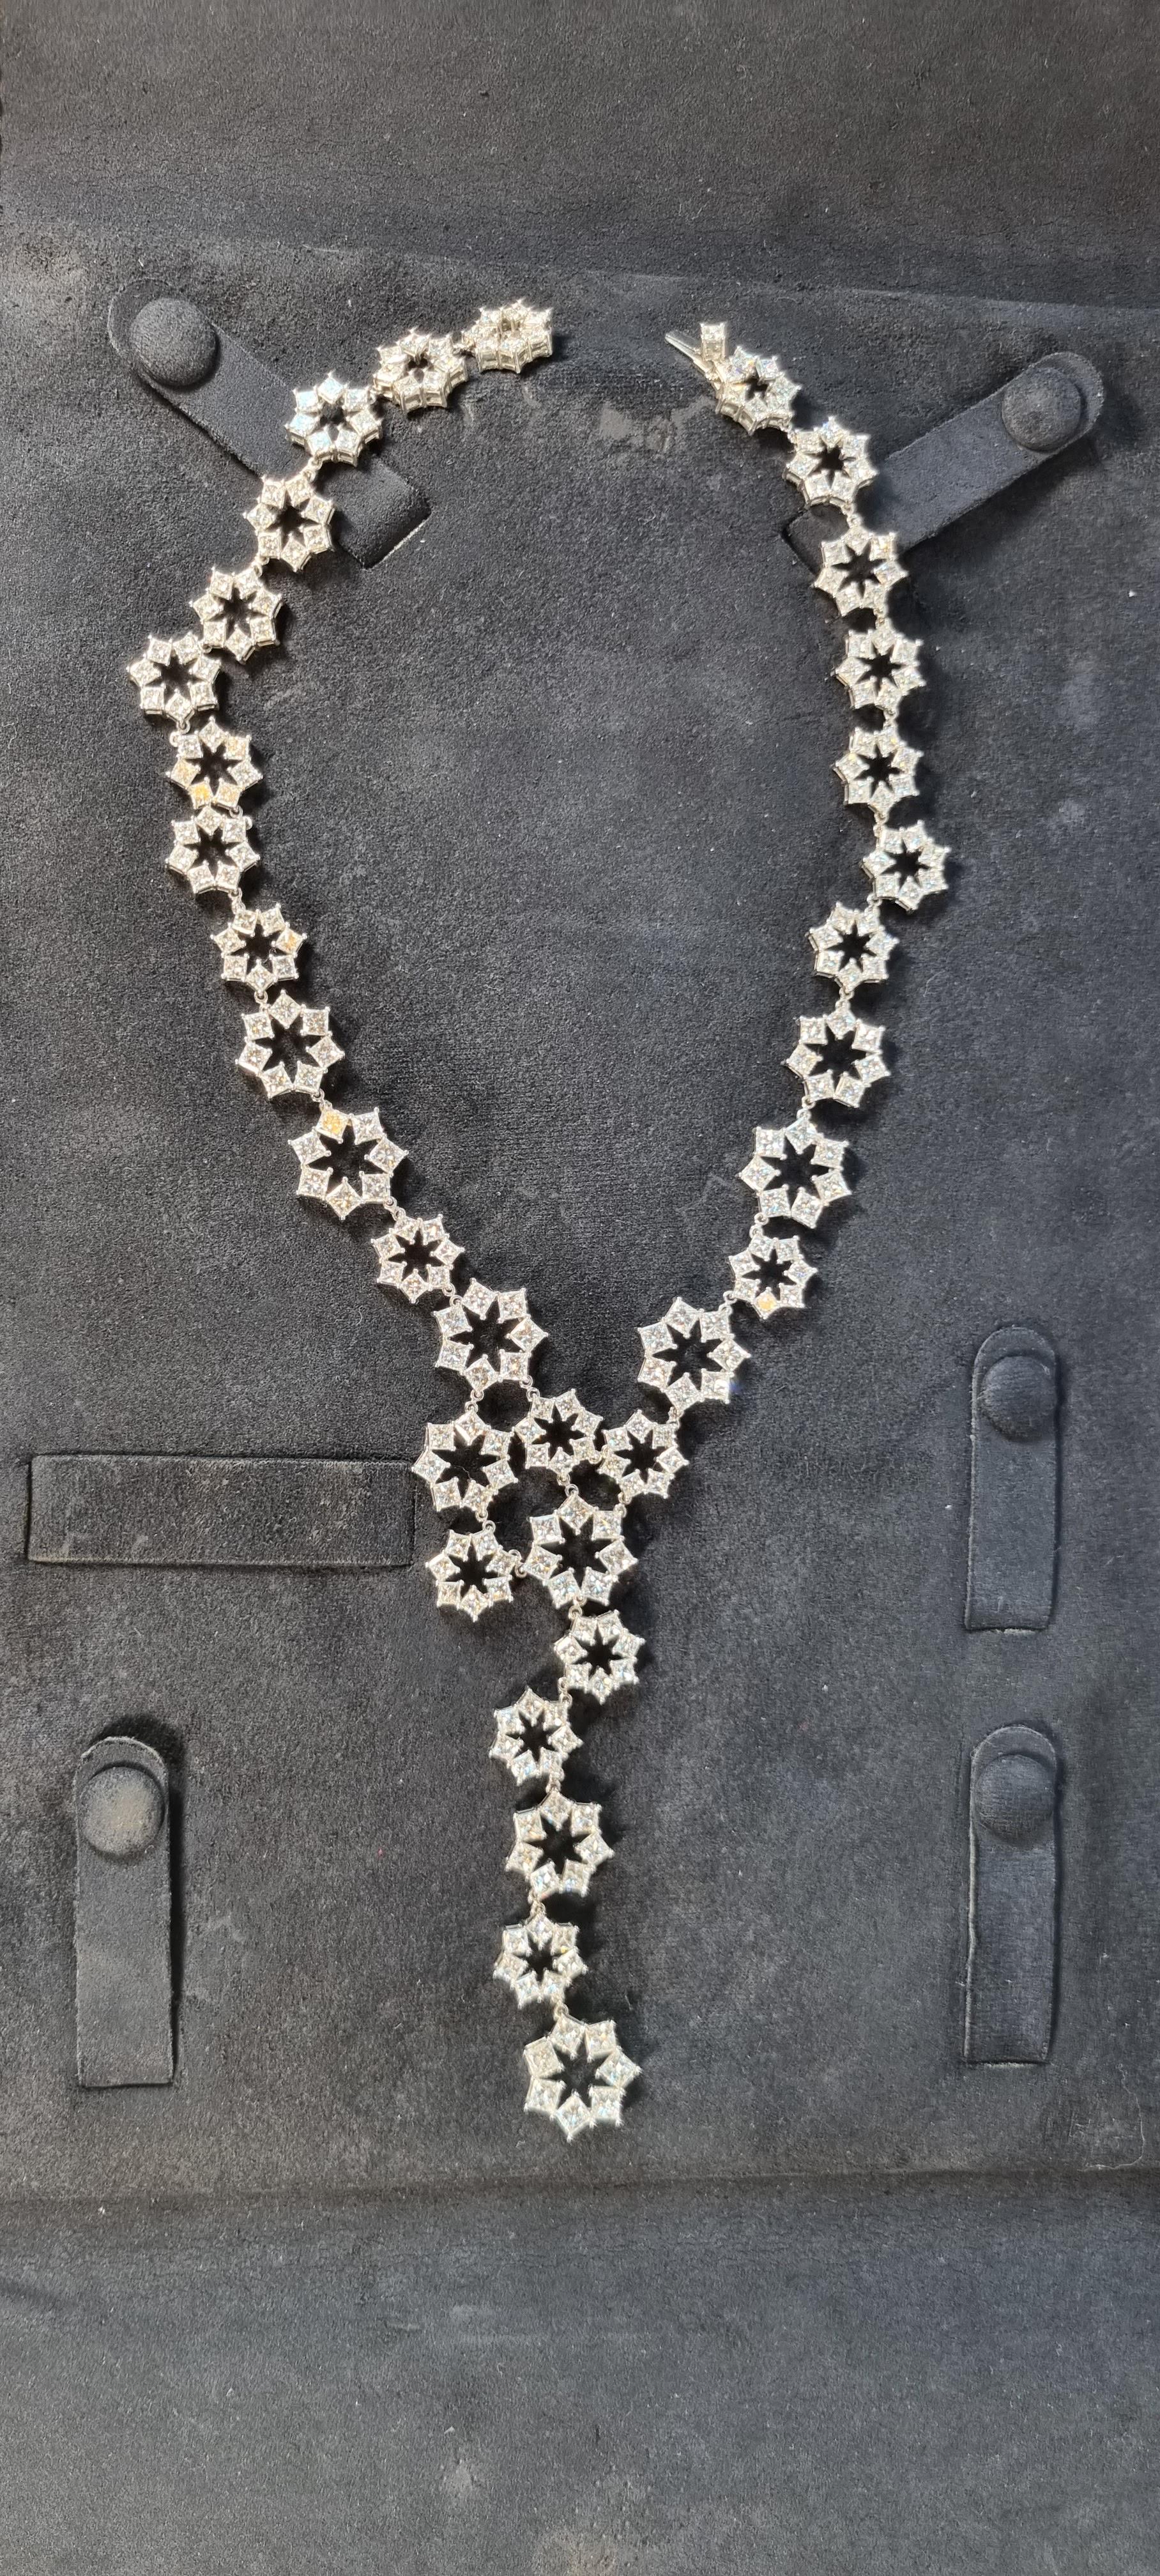 This mesmerizing diamond necklace from Chopard's is crafted in 18 karat white gold, featuring 239 princess cut diamonds that go from 0.15ct to 0.30ct and total diamond weight is 46,59carats, F color, VS clarity. Total gold of necklace 53gr 
With a